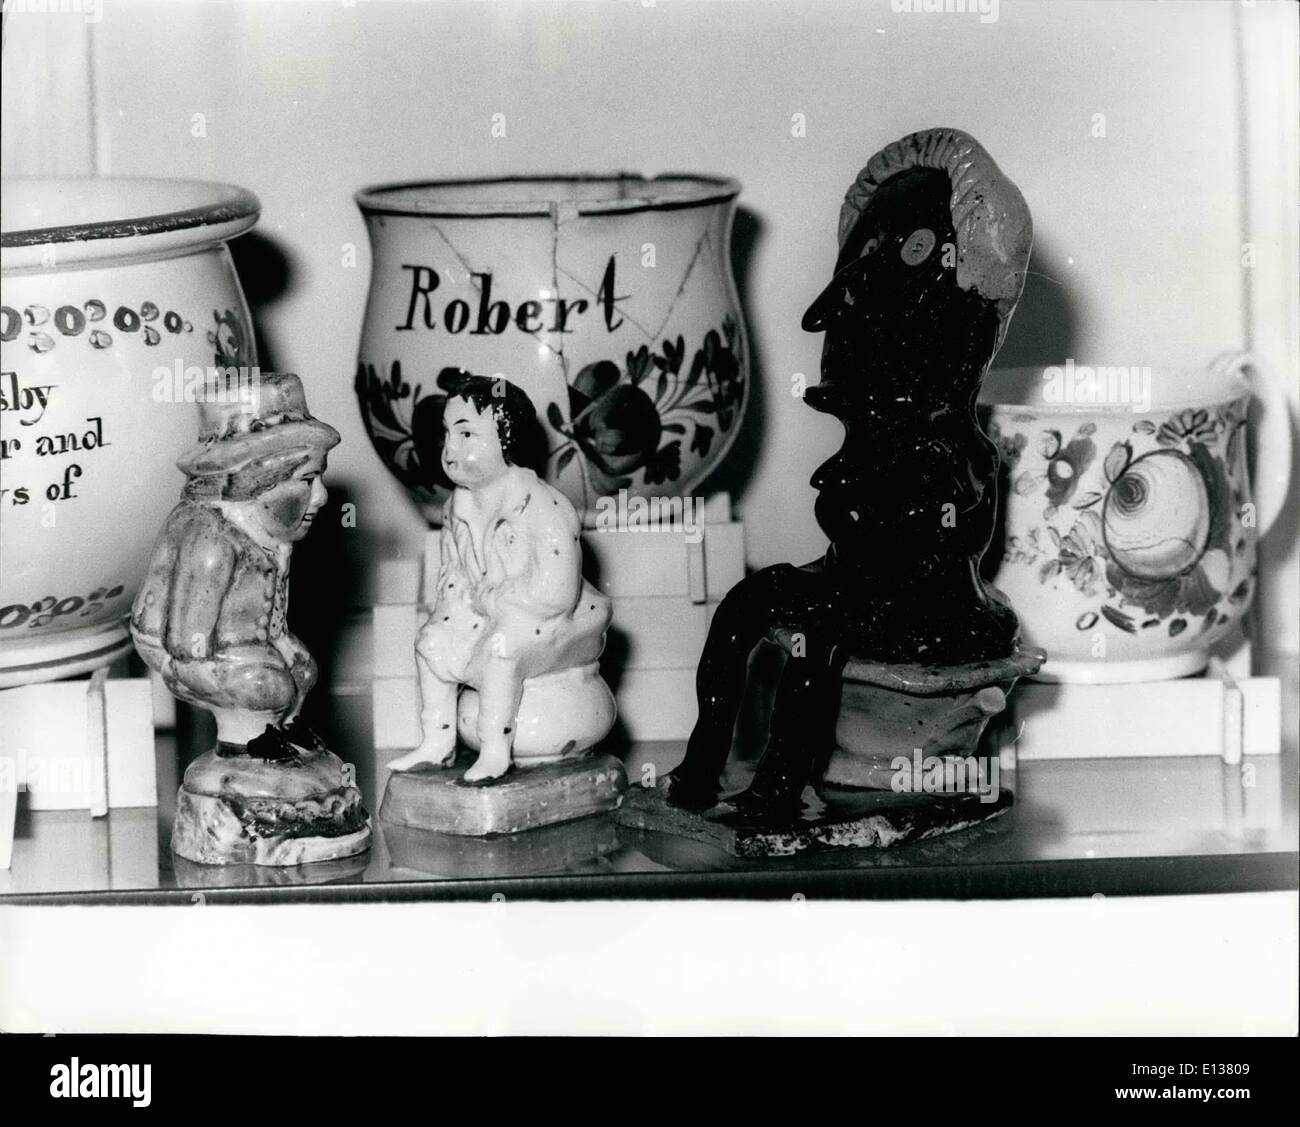 Feb. 29, 2012 - Photo shows The collection also includes these figures. Stock Photo